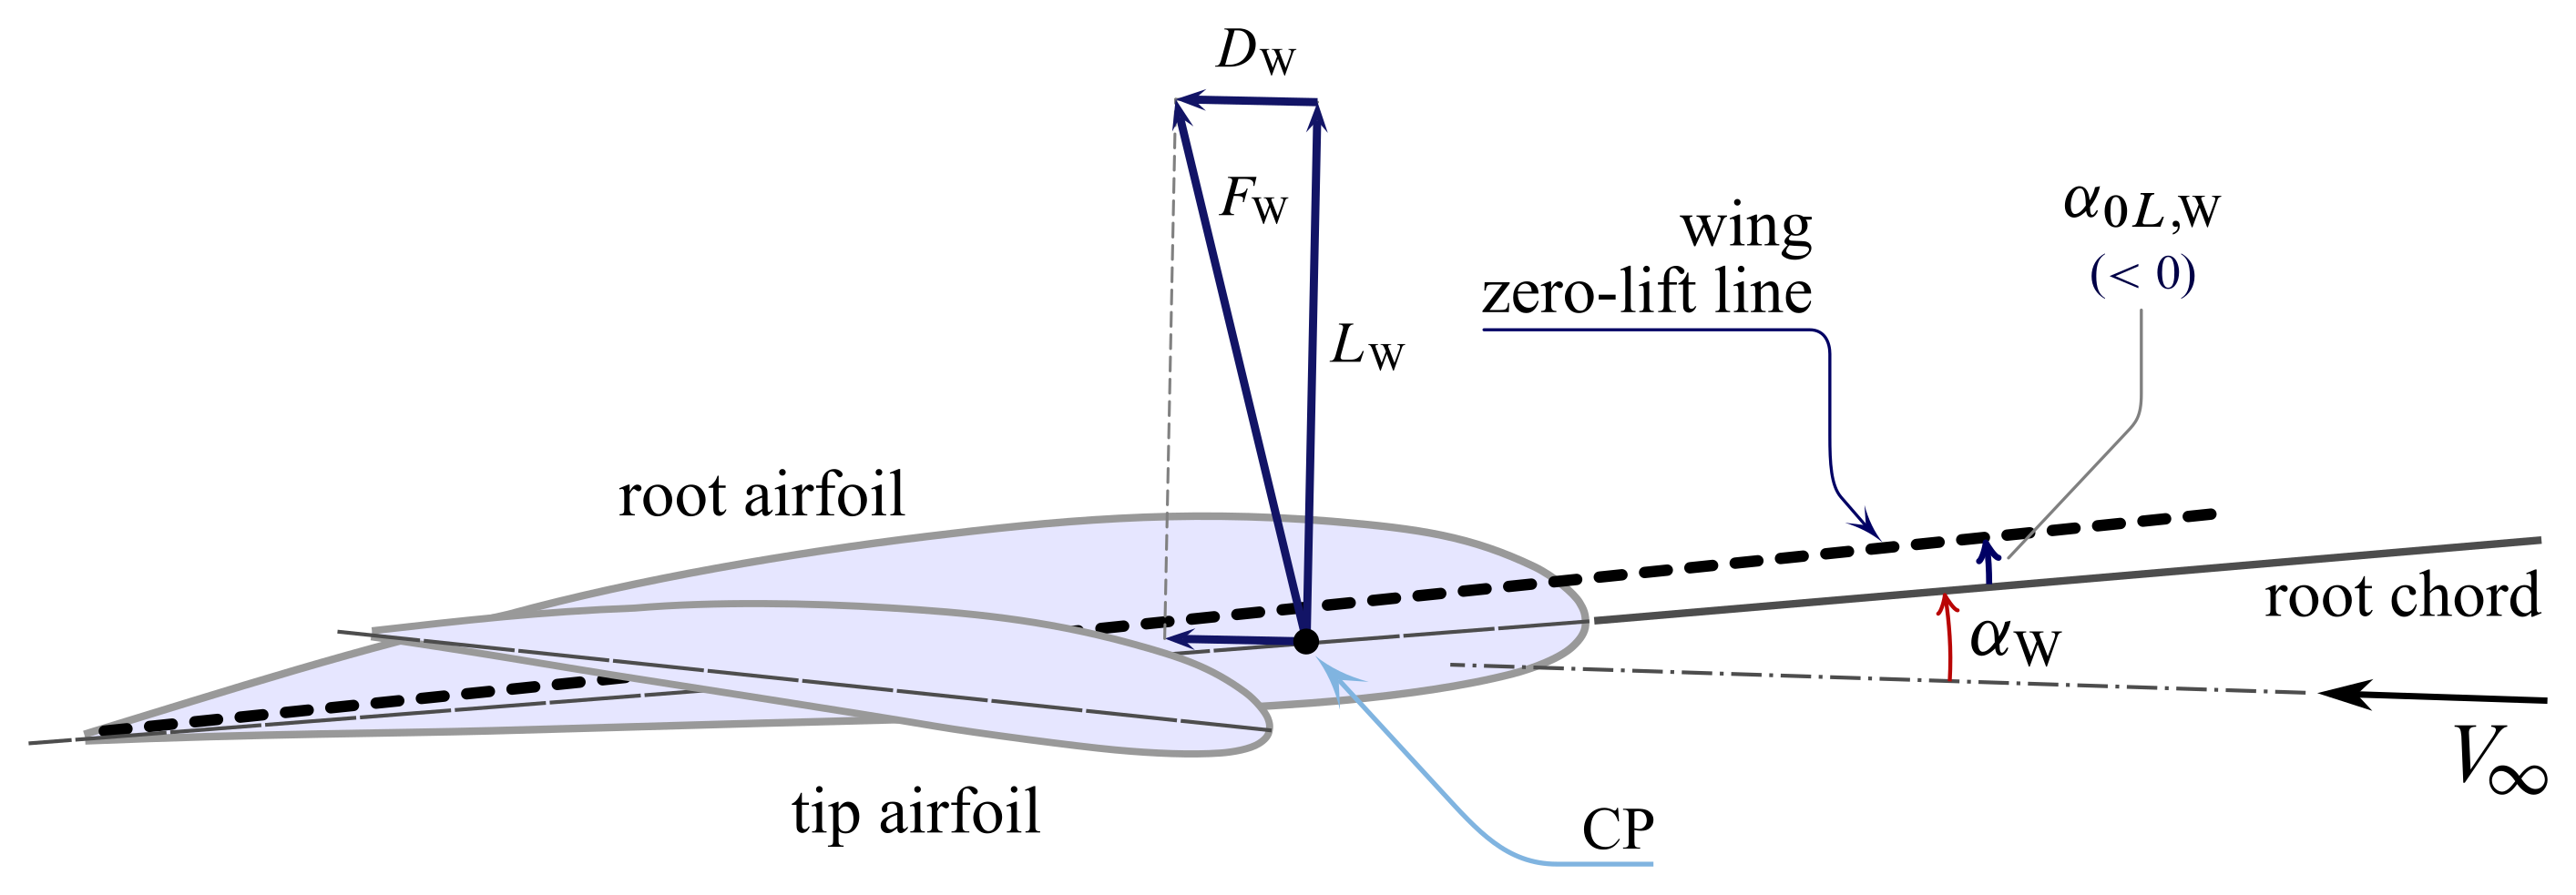 External aerodynamic actions on a wing reduced to the aerodynamic resultant force $F_\mathrm{W}$ applied to the center of pressure (CP) on the root chord.